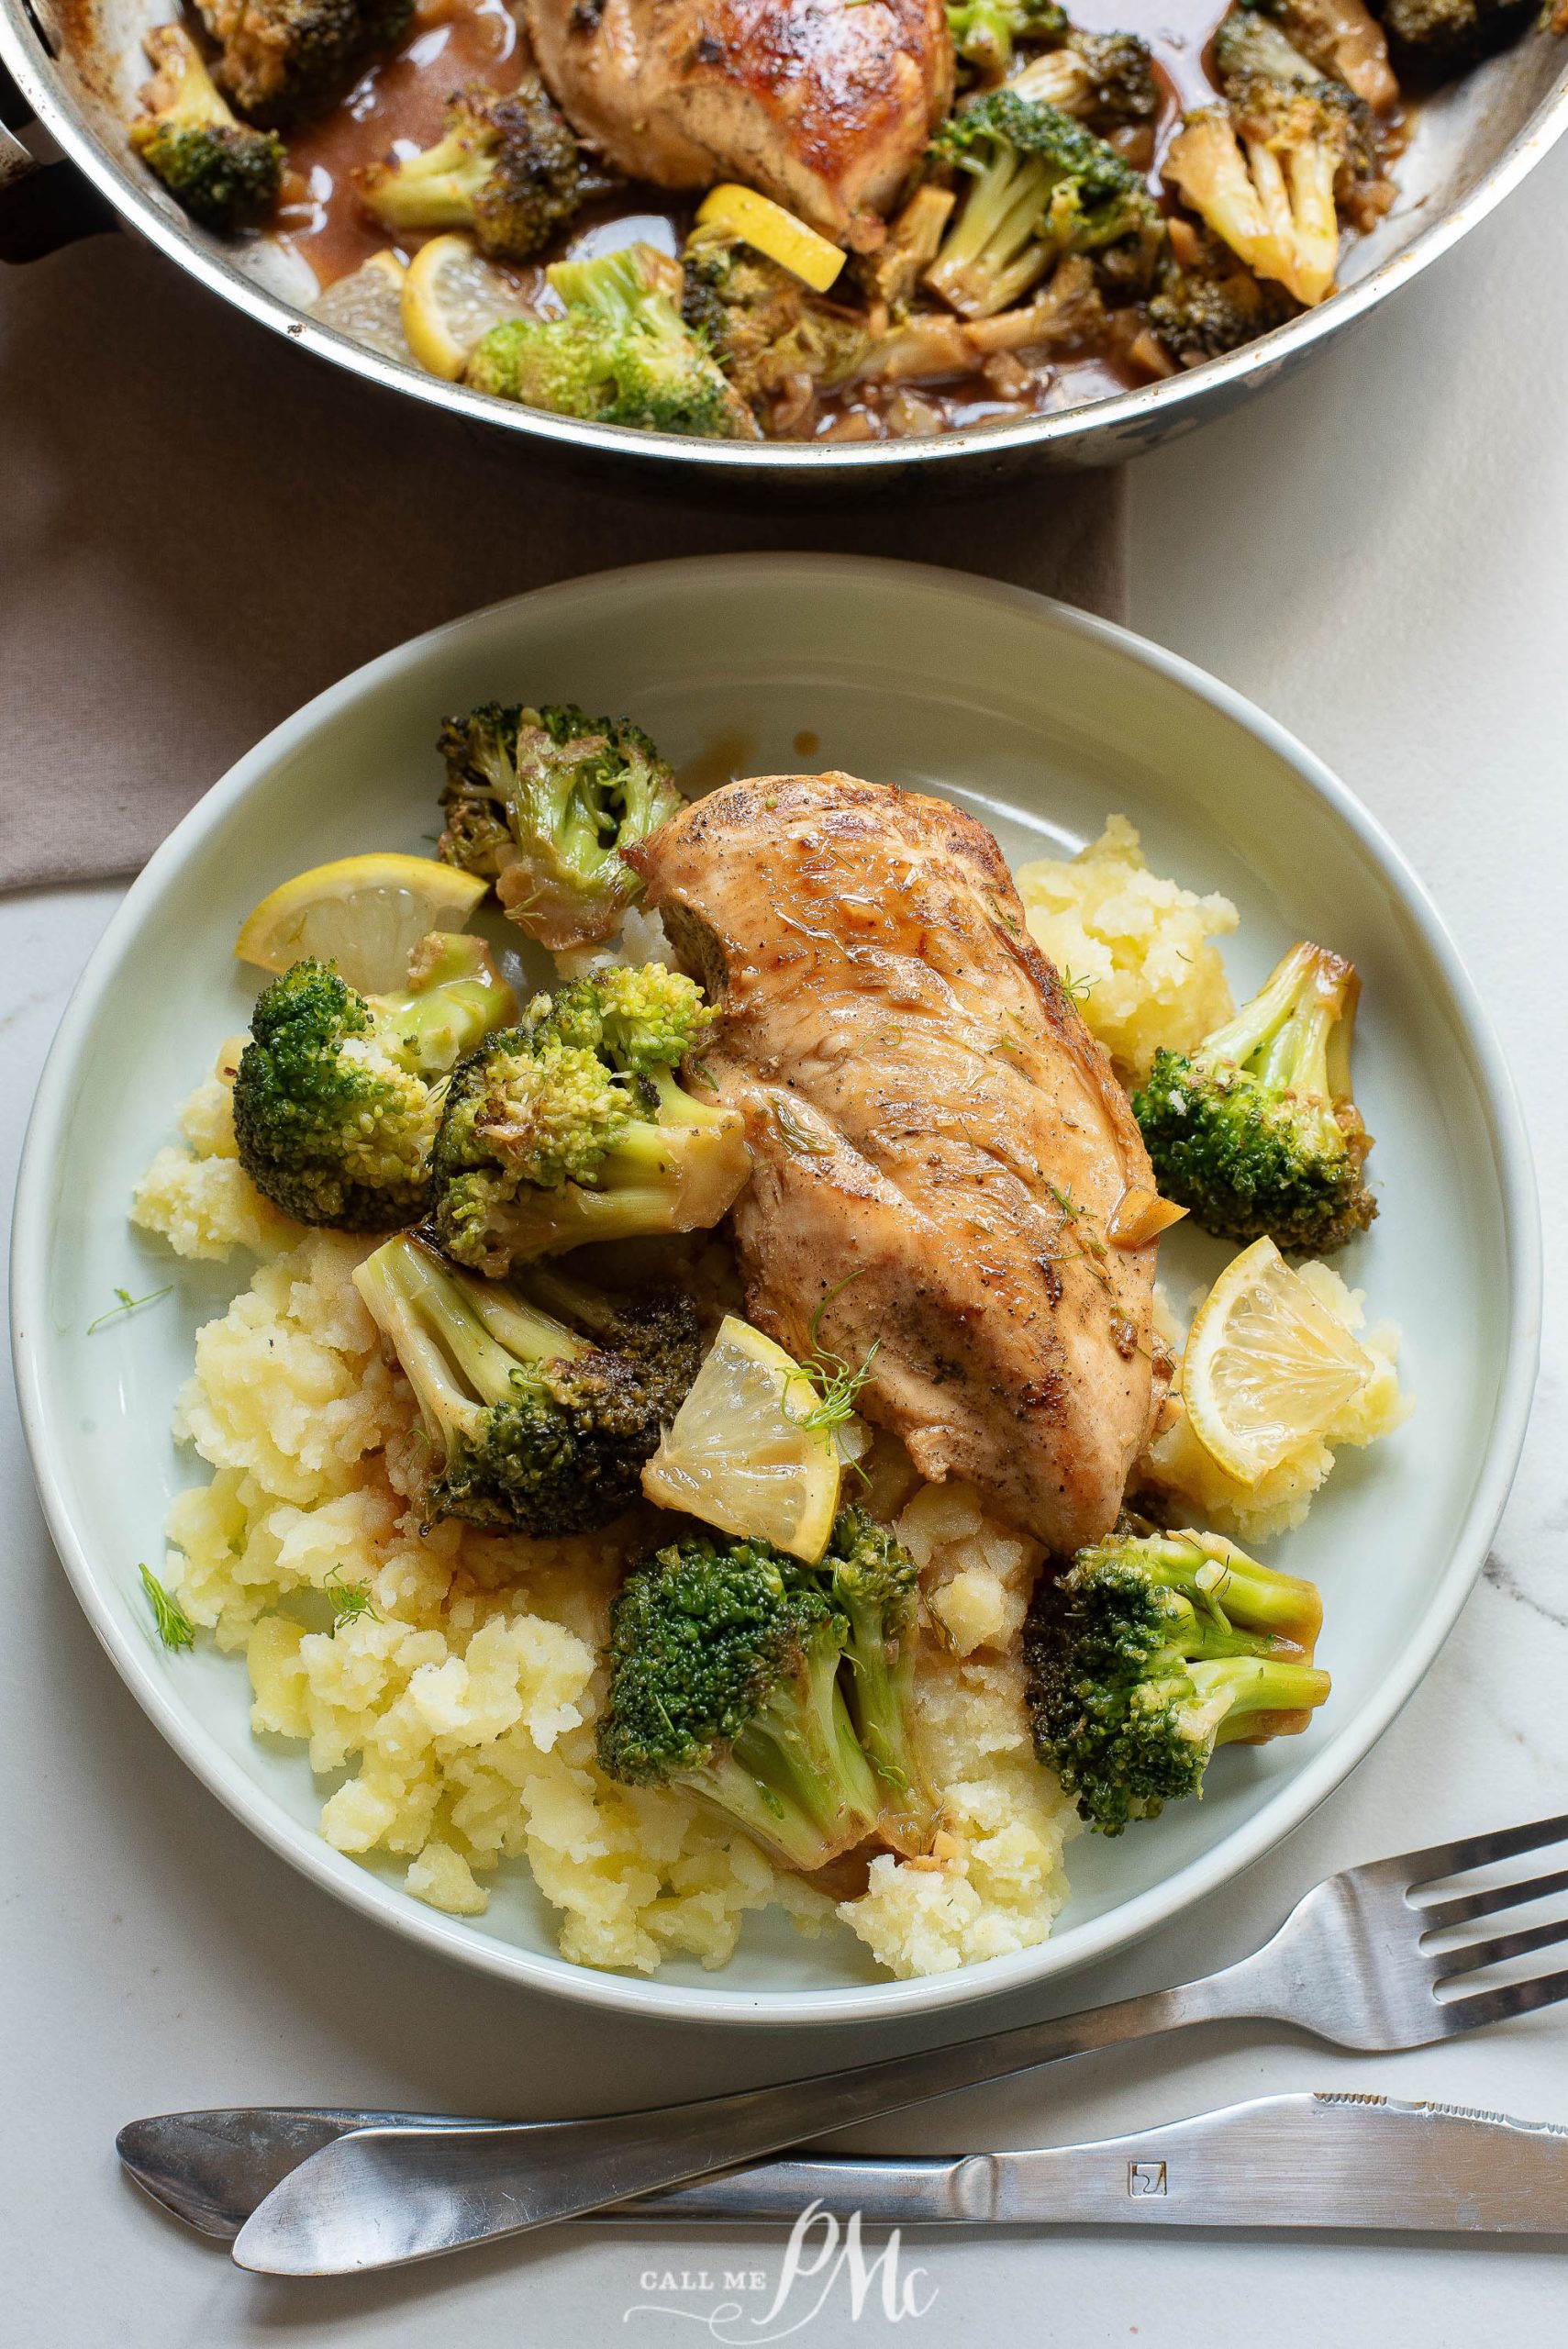 Grilled chicken breast with broccoli and mashed potatoes on a plate.